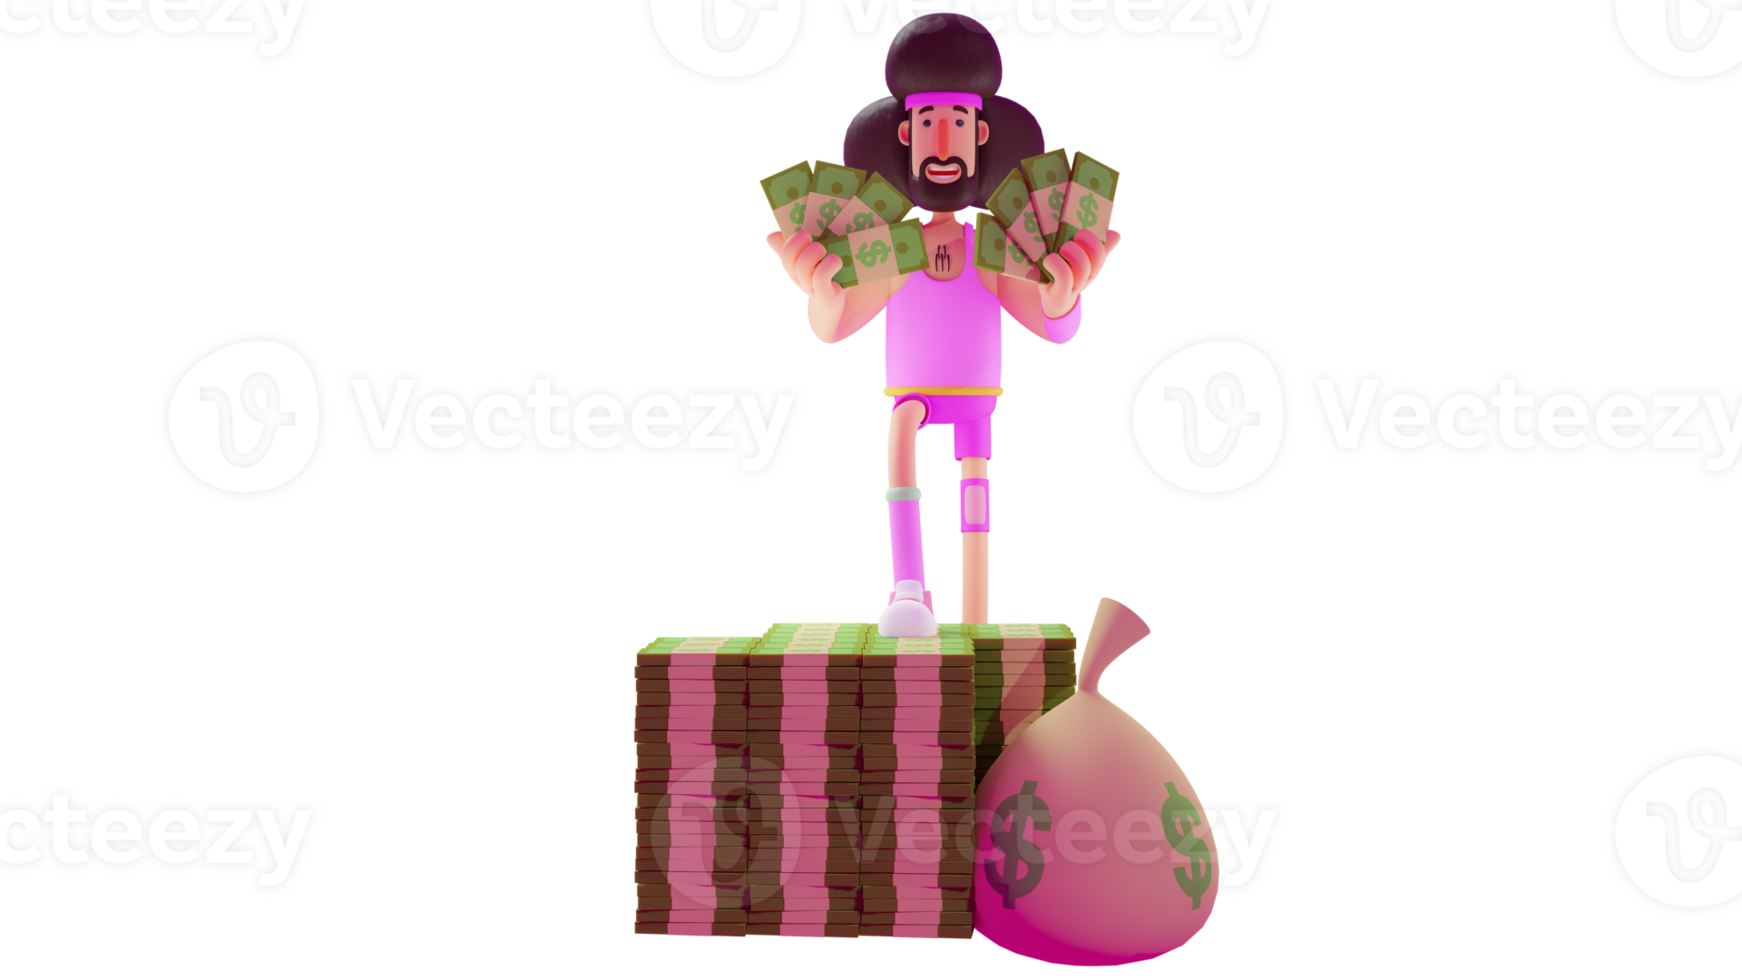 3D illustration. Rich Athlete 3D cartoon character. Successful athlete standing on pile of money. Athlete showing off a lot of money he holds. Athlete showing happy expression. 3D cartoon character png